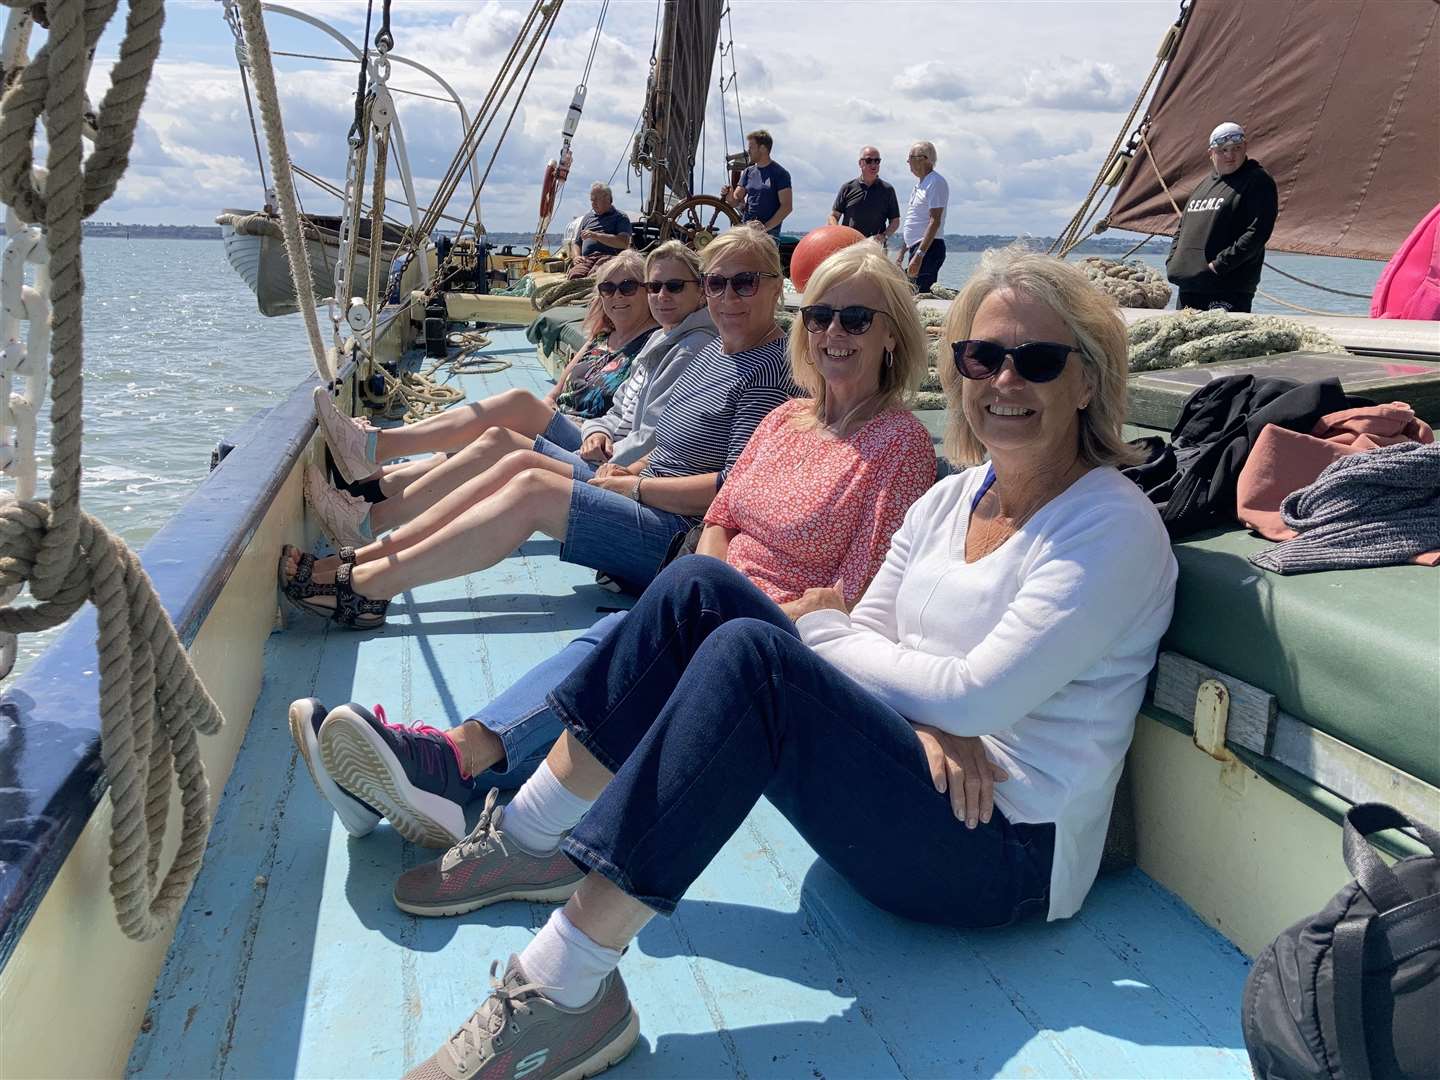 Lapping up the sun on the deck of Thames sailing barge the Edith May